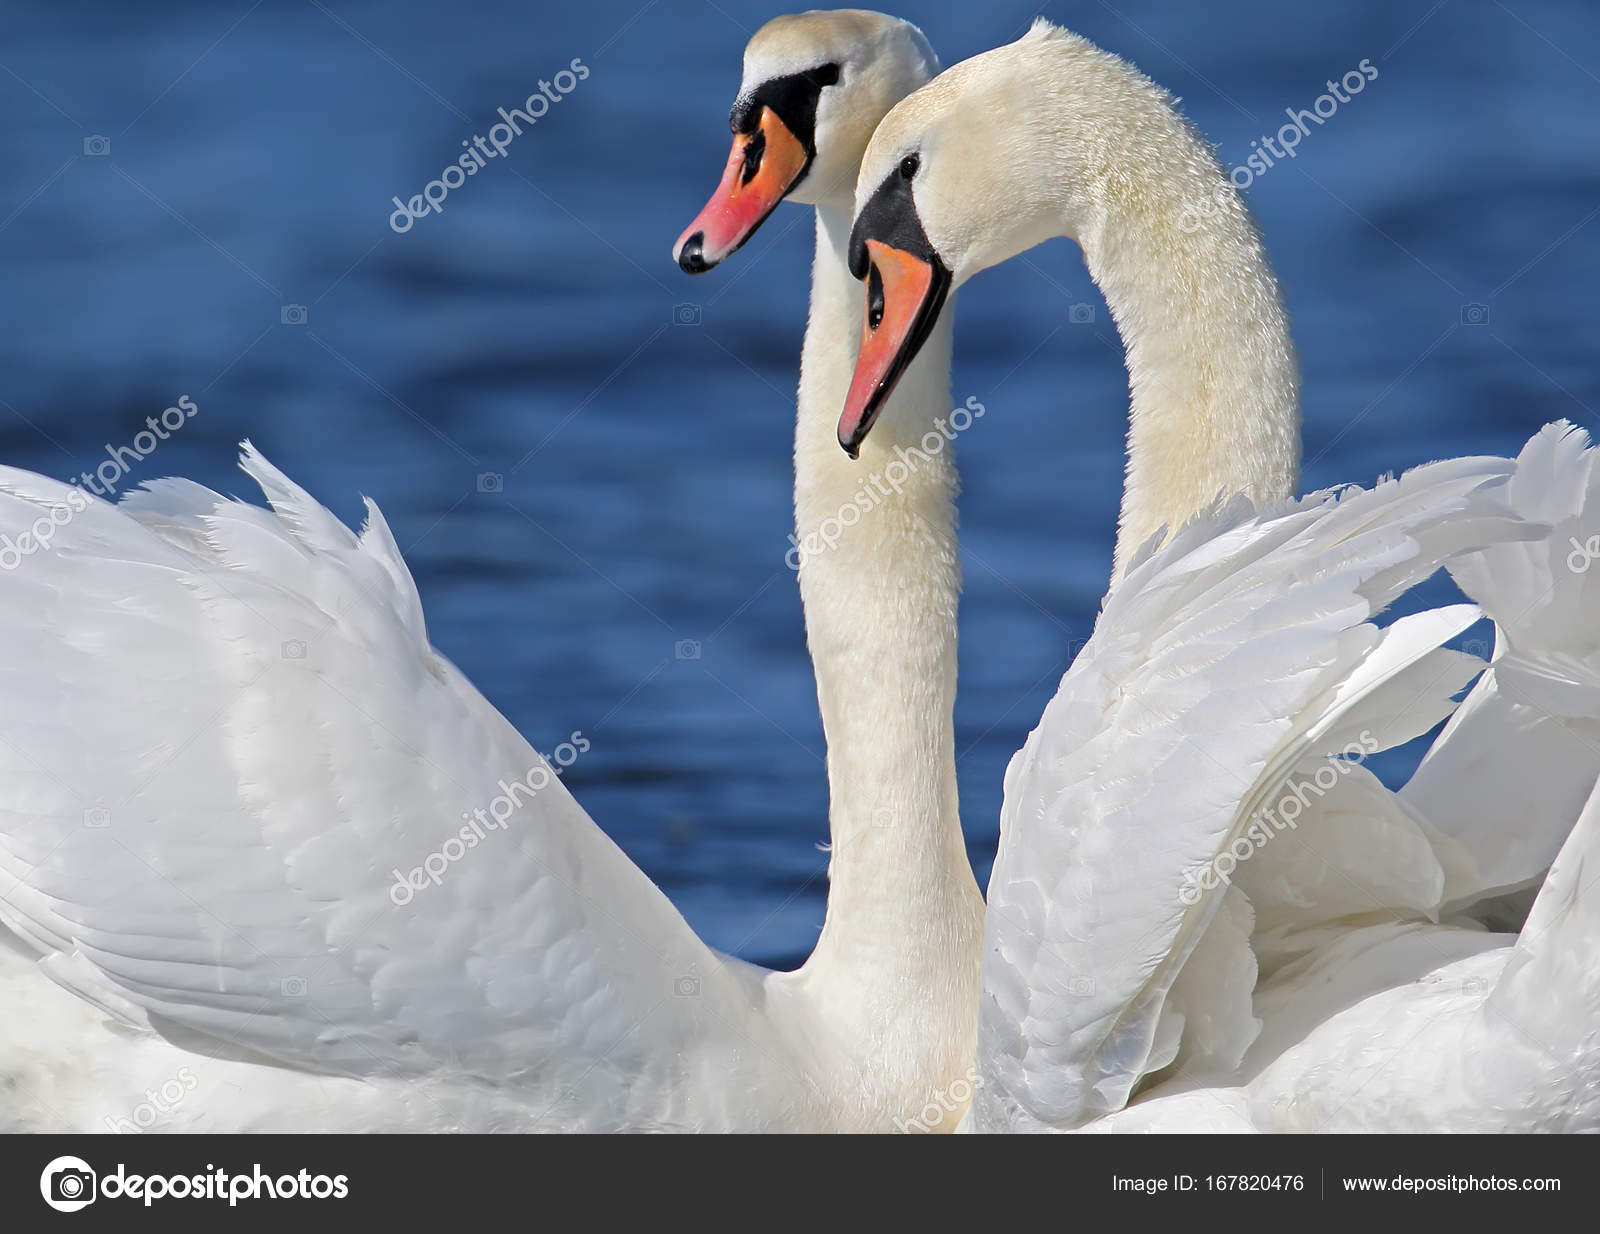 A pair of swan close up view — Stock Photo © voodison #167820476